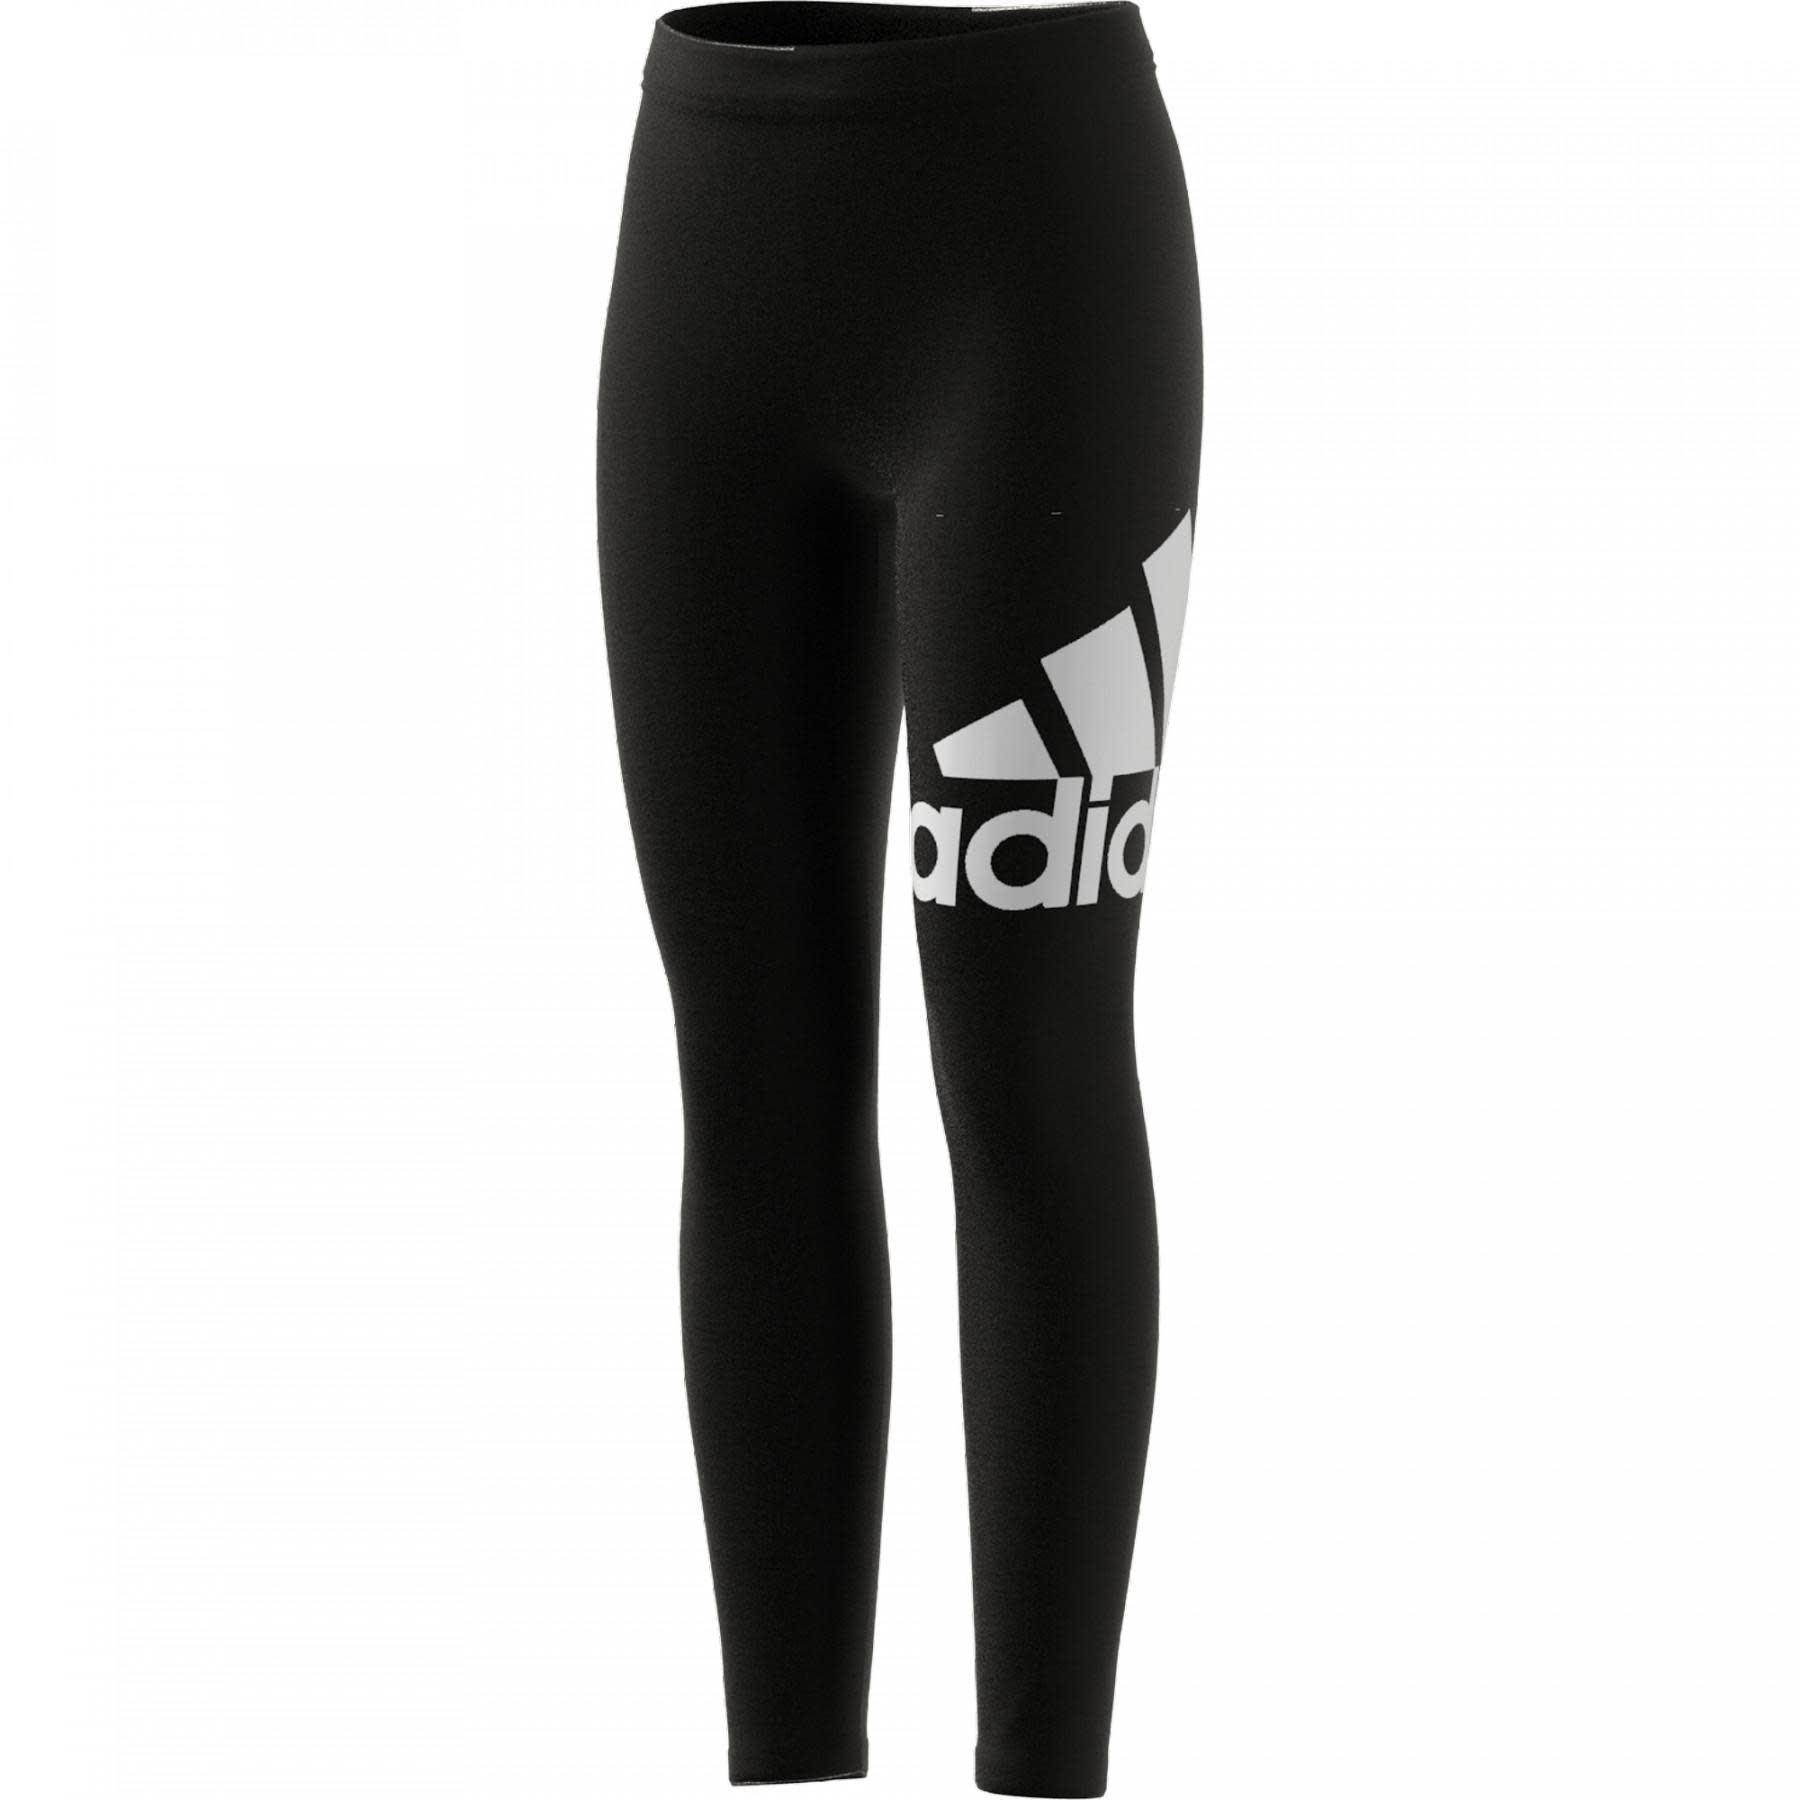 Adidas Adidas Leggings, Essential Tight, Girls - Time-Out Sports